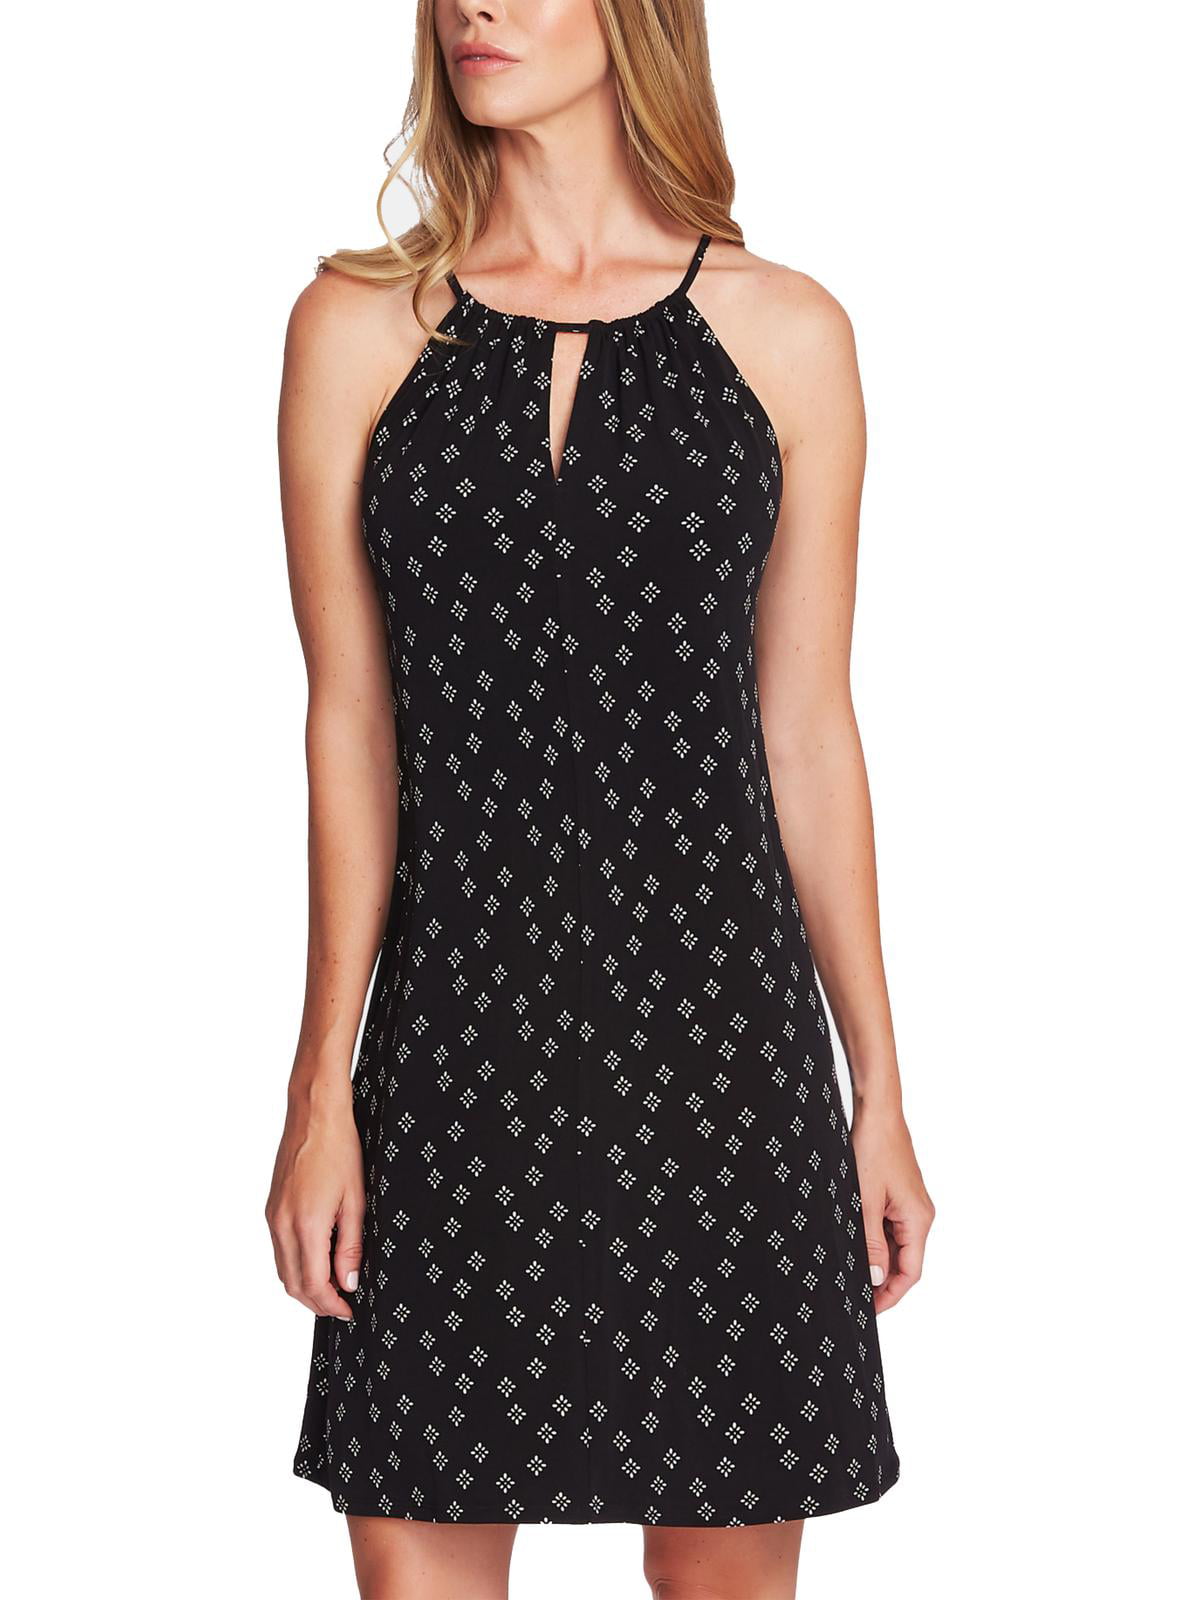 Vince Camuto - Vince Camuto Womens Floral Keyhole Casual Dress